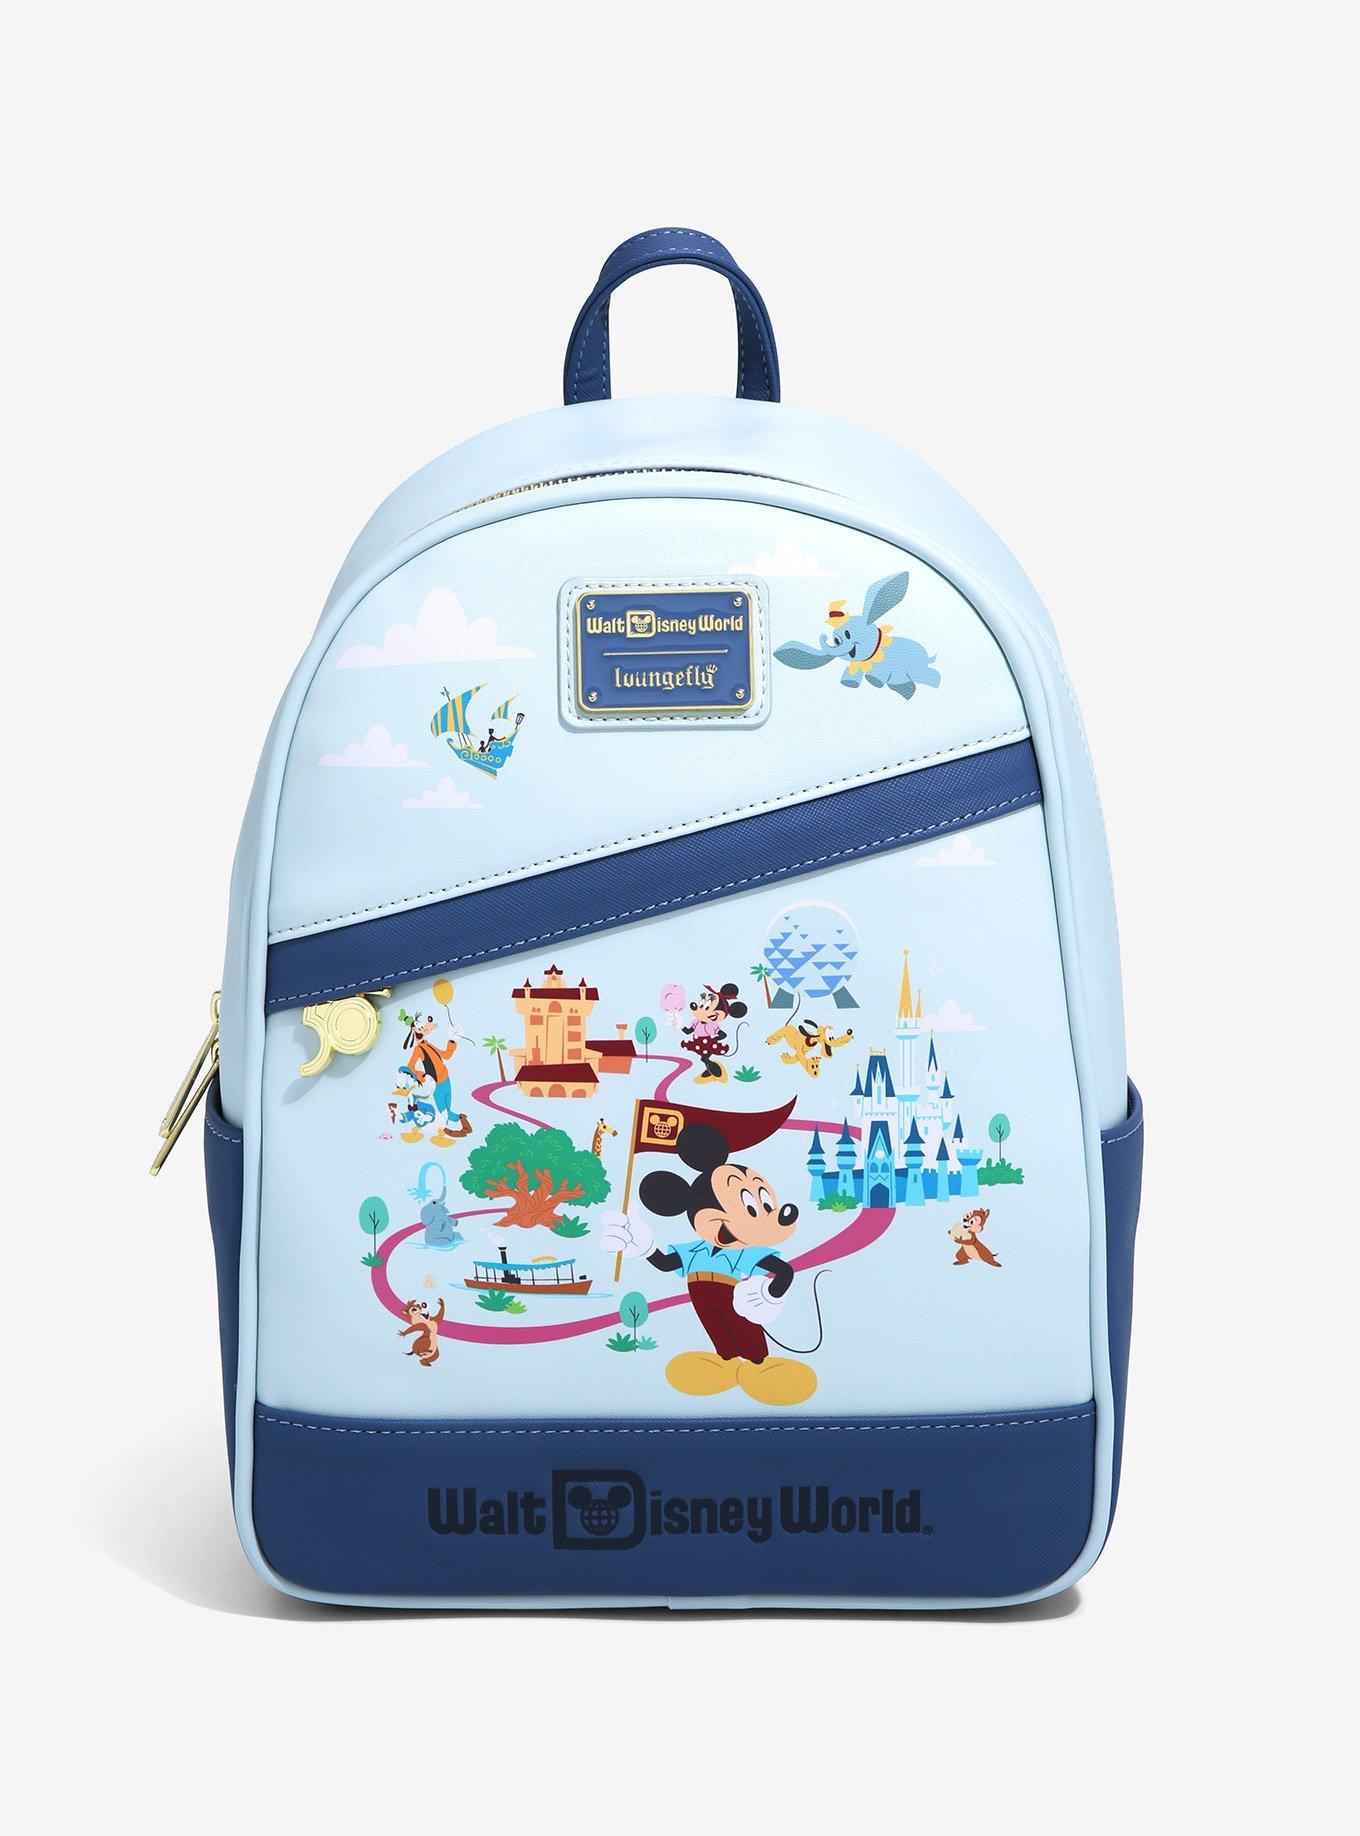 Shipping included / Rare 24K] Disney World 50th Anniversary Loungefly  Backpack